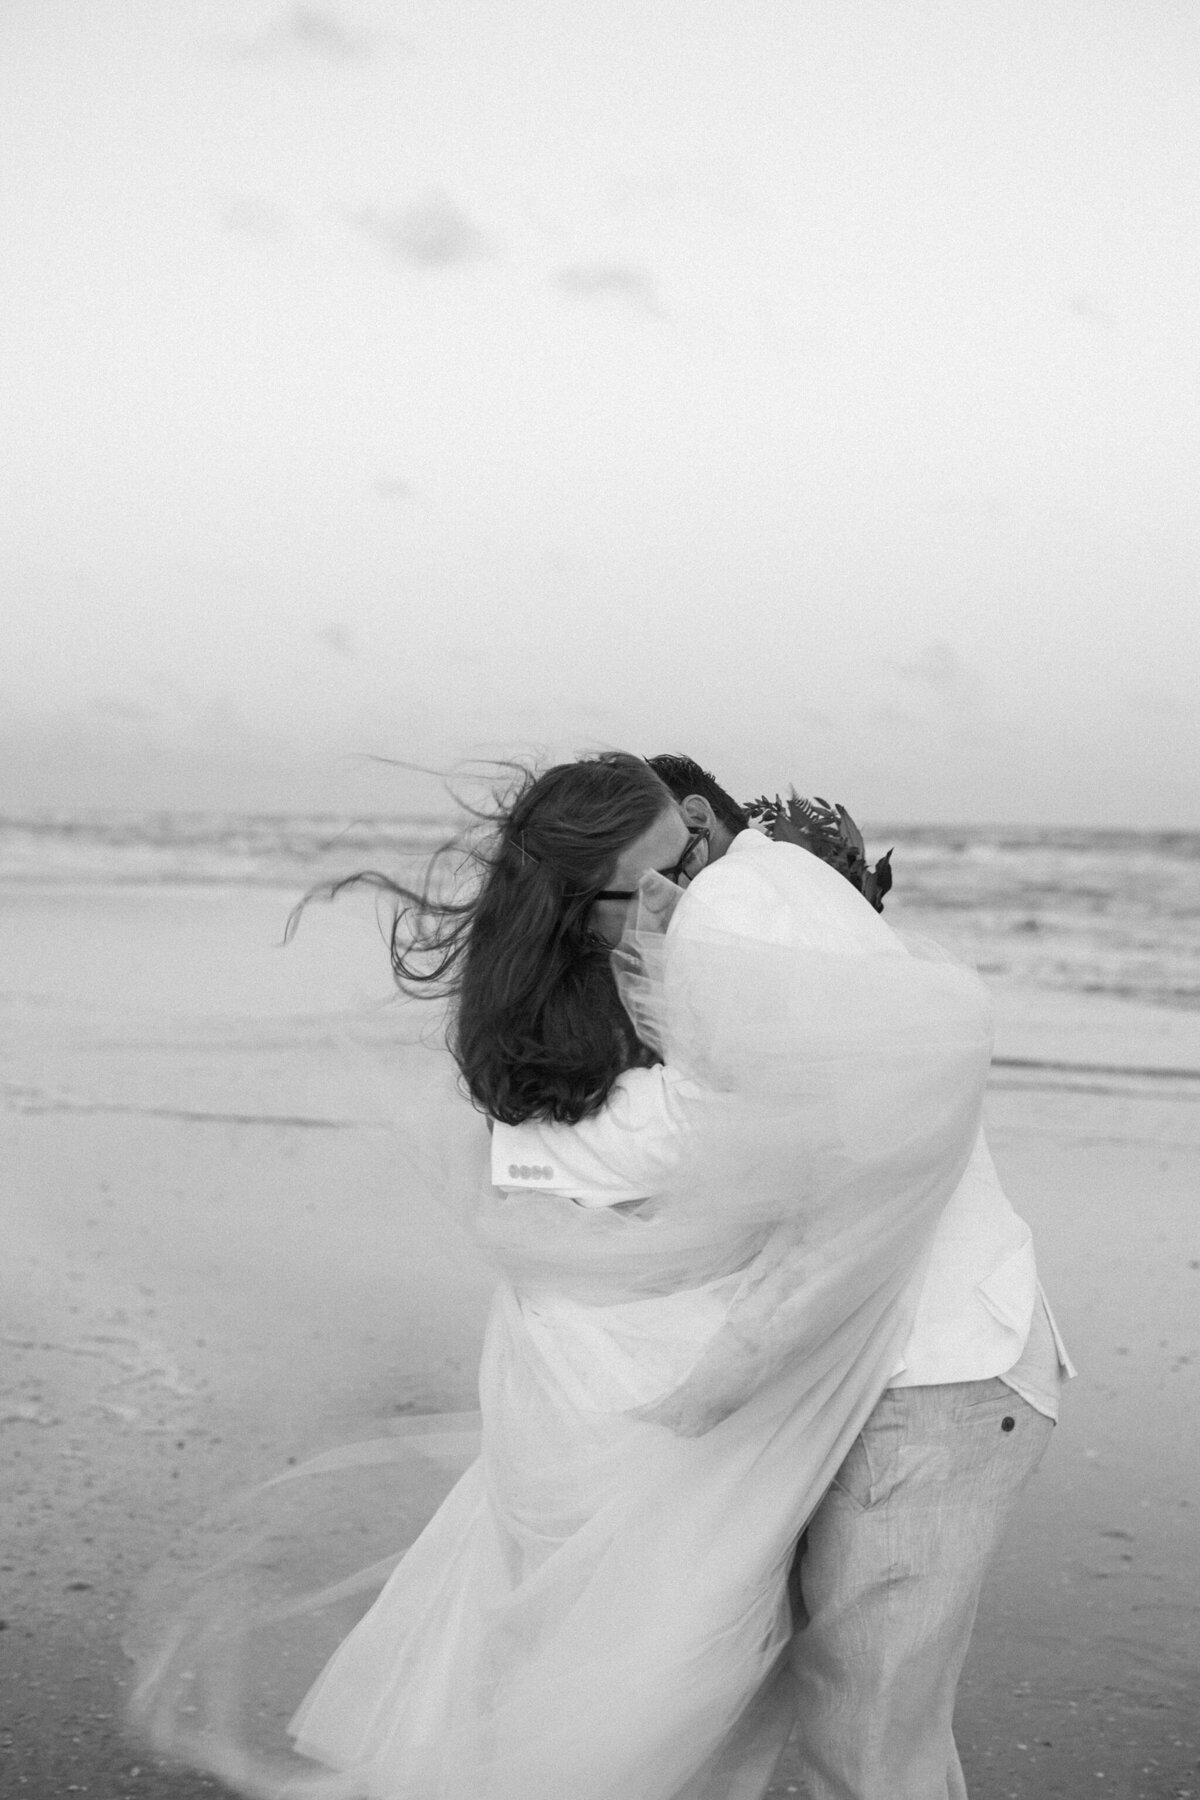 A black and white photo of a bride and groom deeply embracing on the beach after their wedding ceremony at Crystal Beach, Texas. The bride is on the left and is wearing a white dress with a long, flowing veil that wraps around the front of both of them. The groom is on the right and is wearing a white dress shirt with khaki pants.